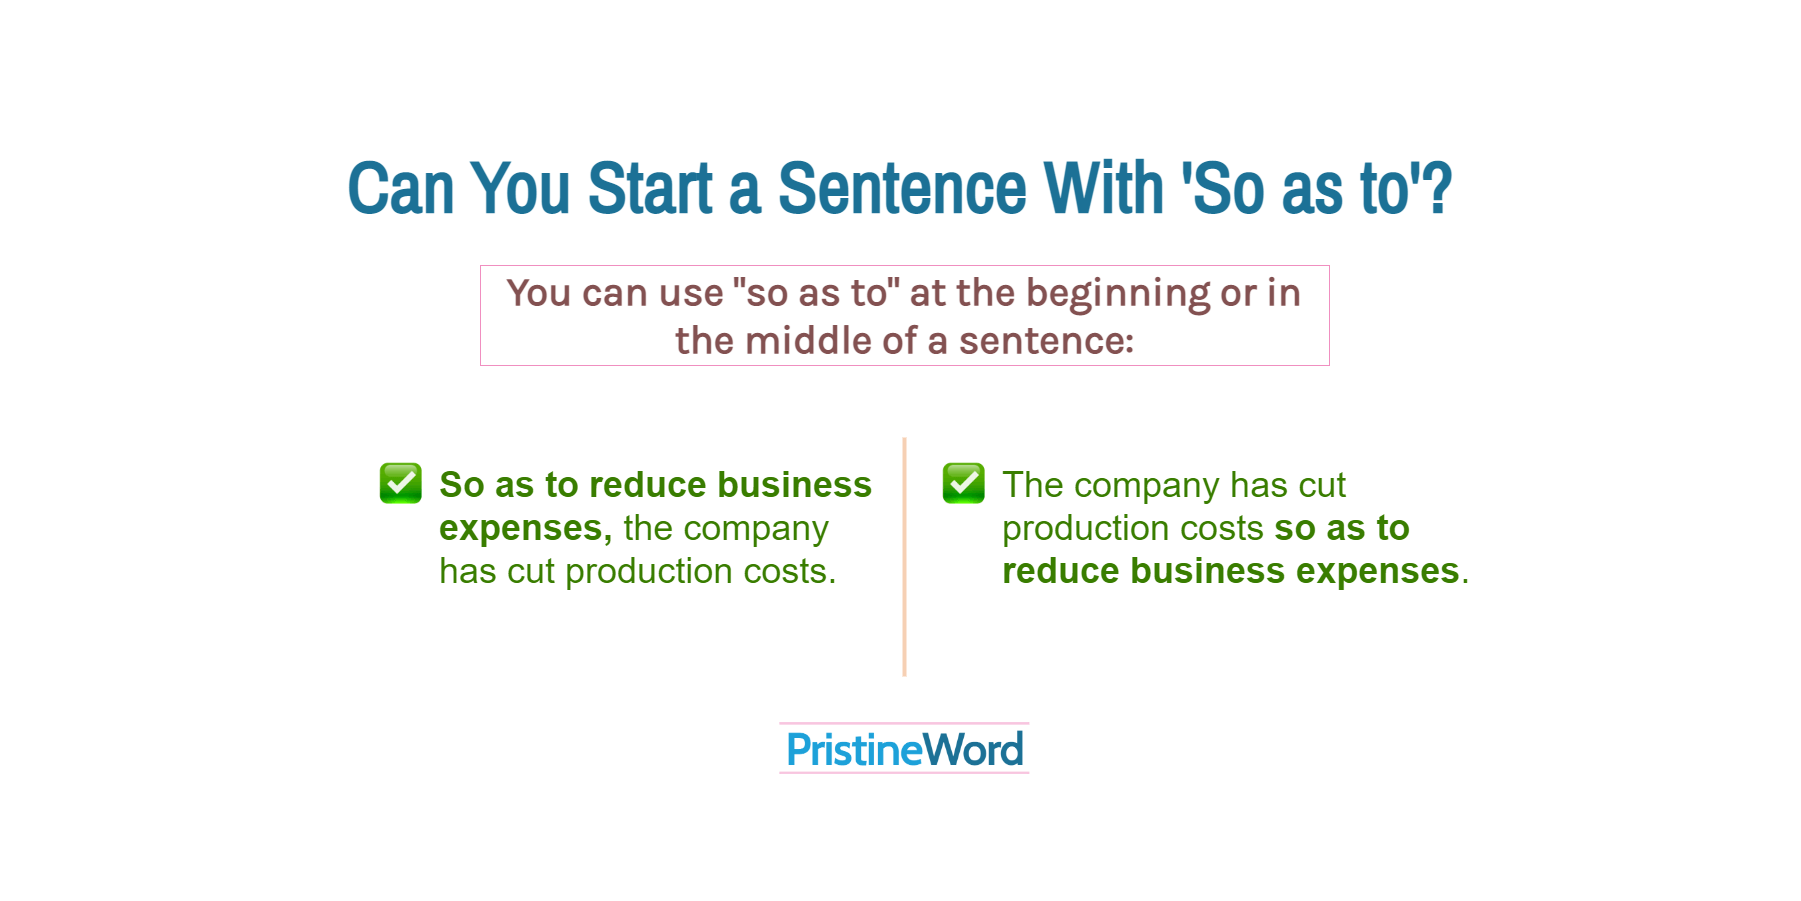 Can You Start a Sentence With 'So as to'?